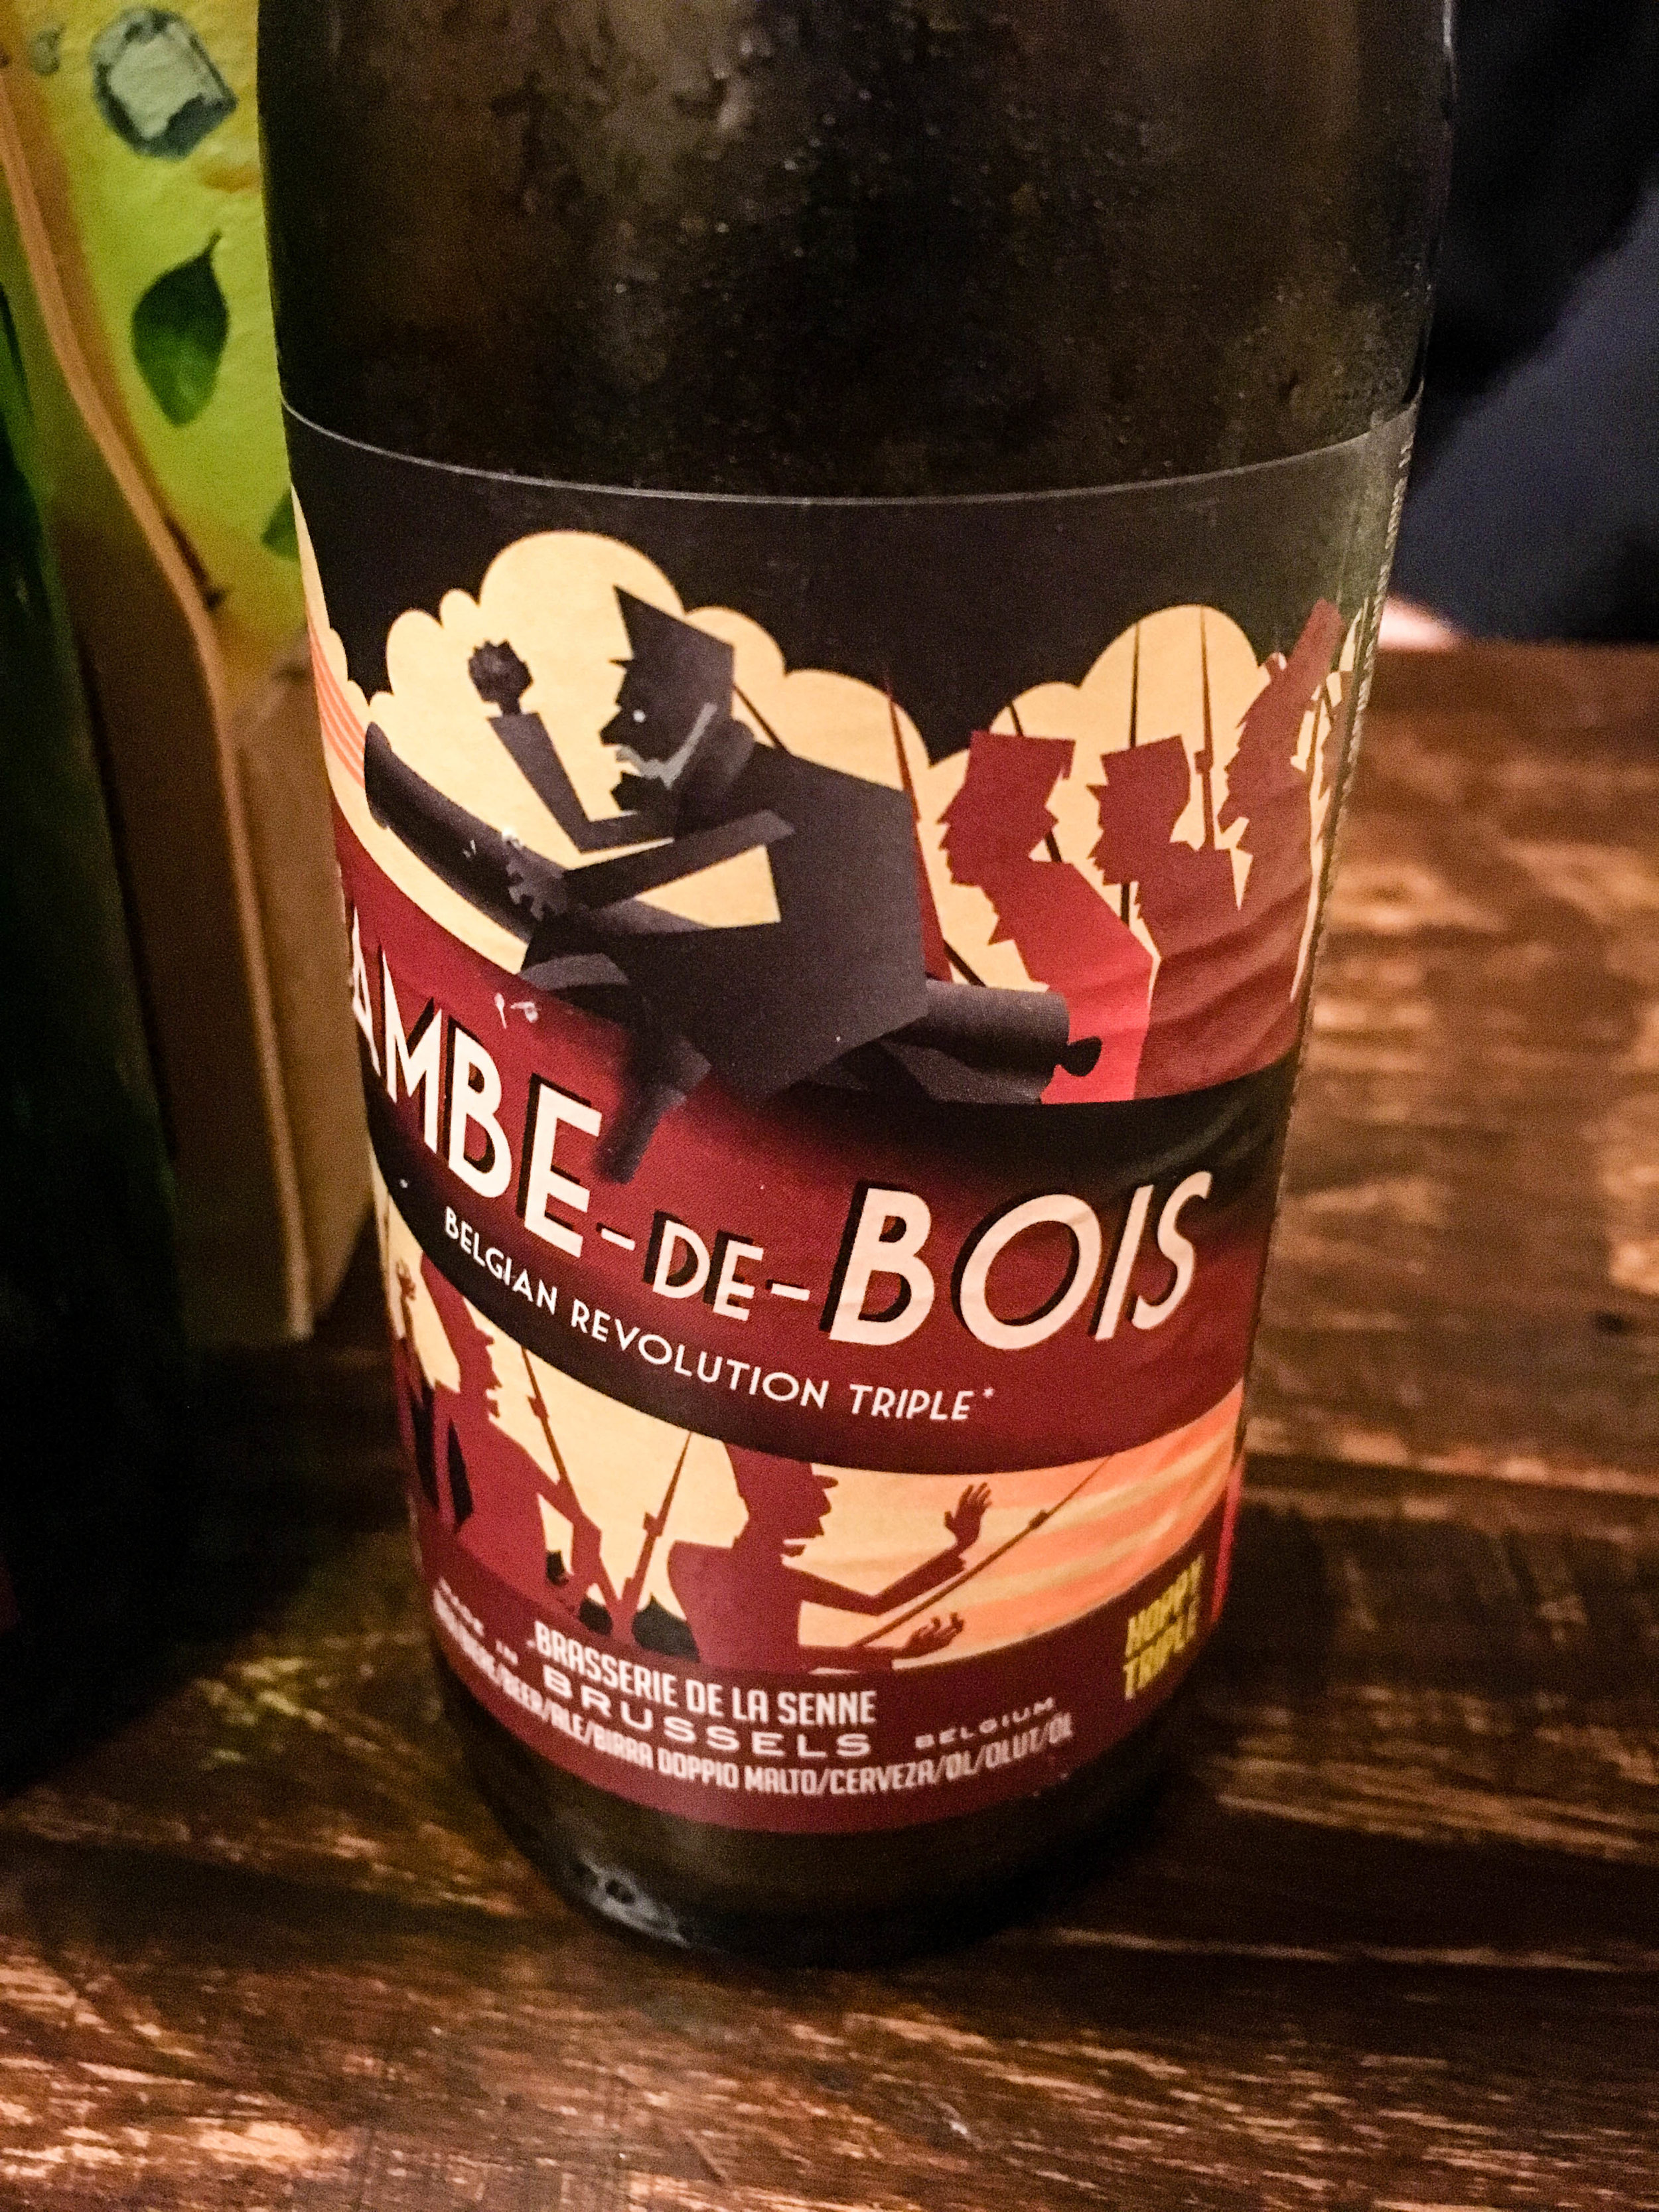 Jambe-de-bois, a Belgian beer tasted during our Brussels Beer and Chocolate Tour given by Brussels Journey